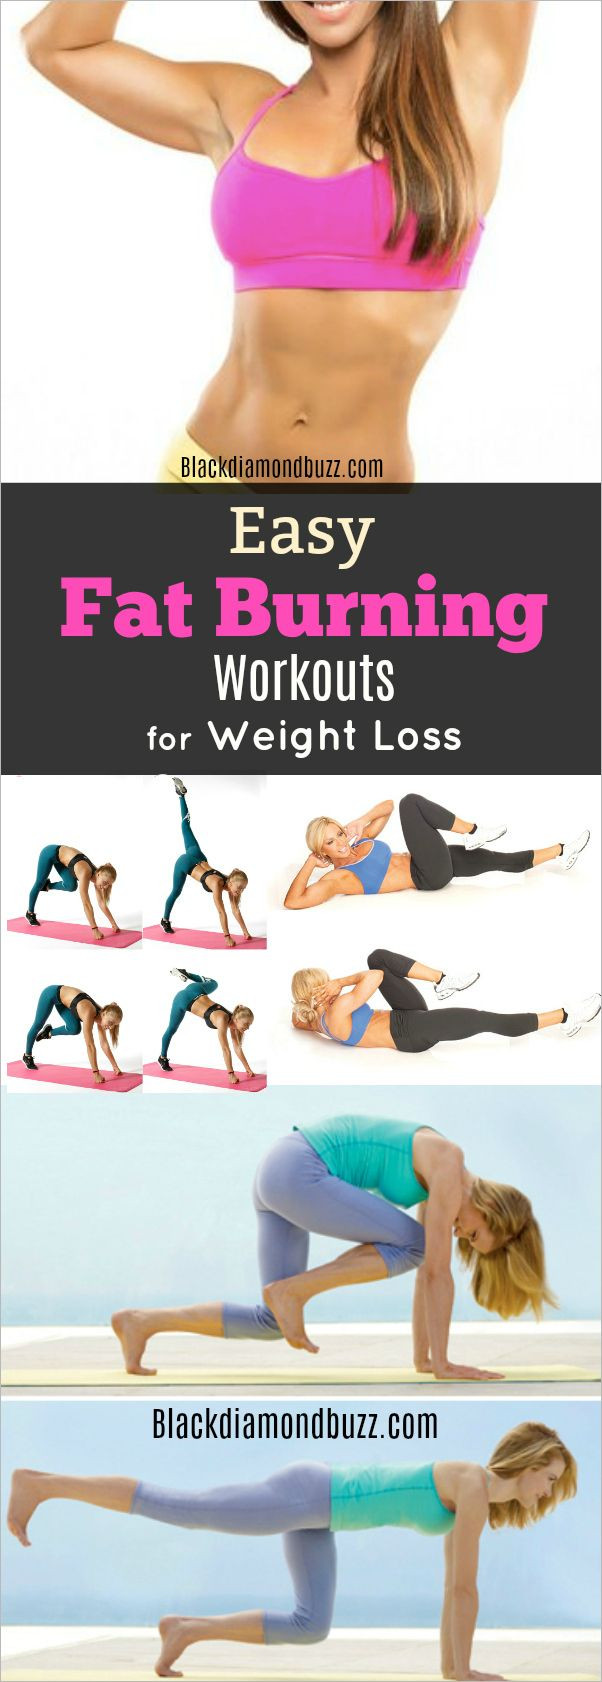 Best Fat Burning Workout
 12 Best Fat Burning Workouts For Fast Weight Loss